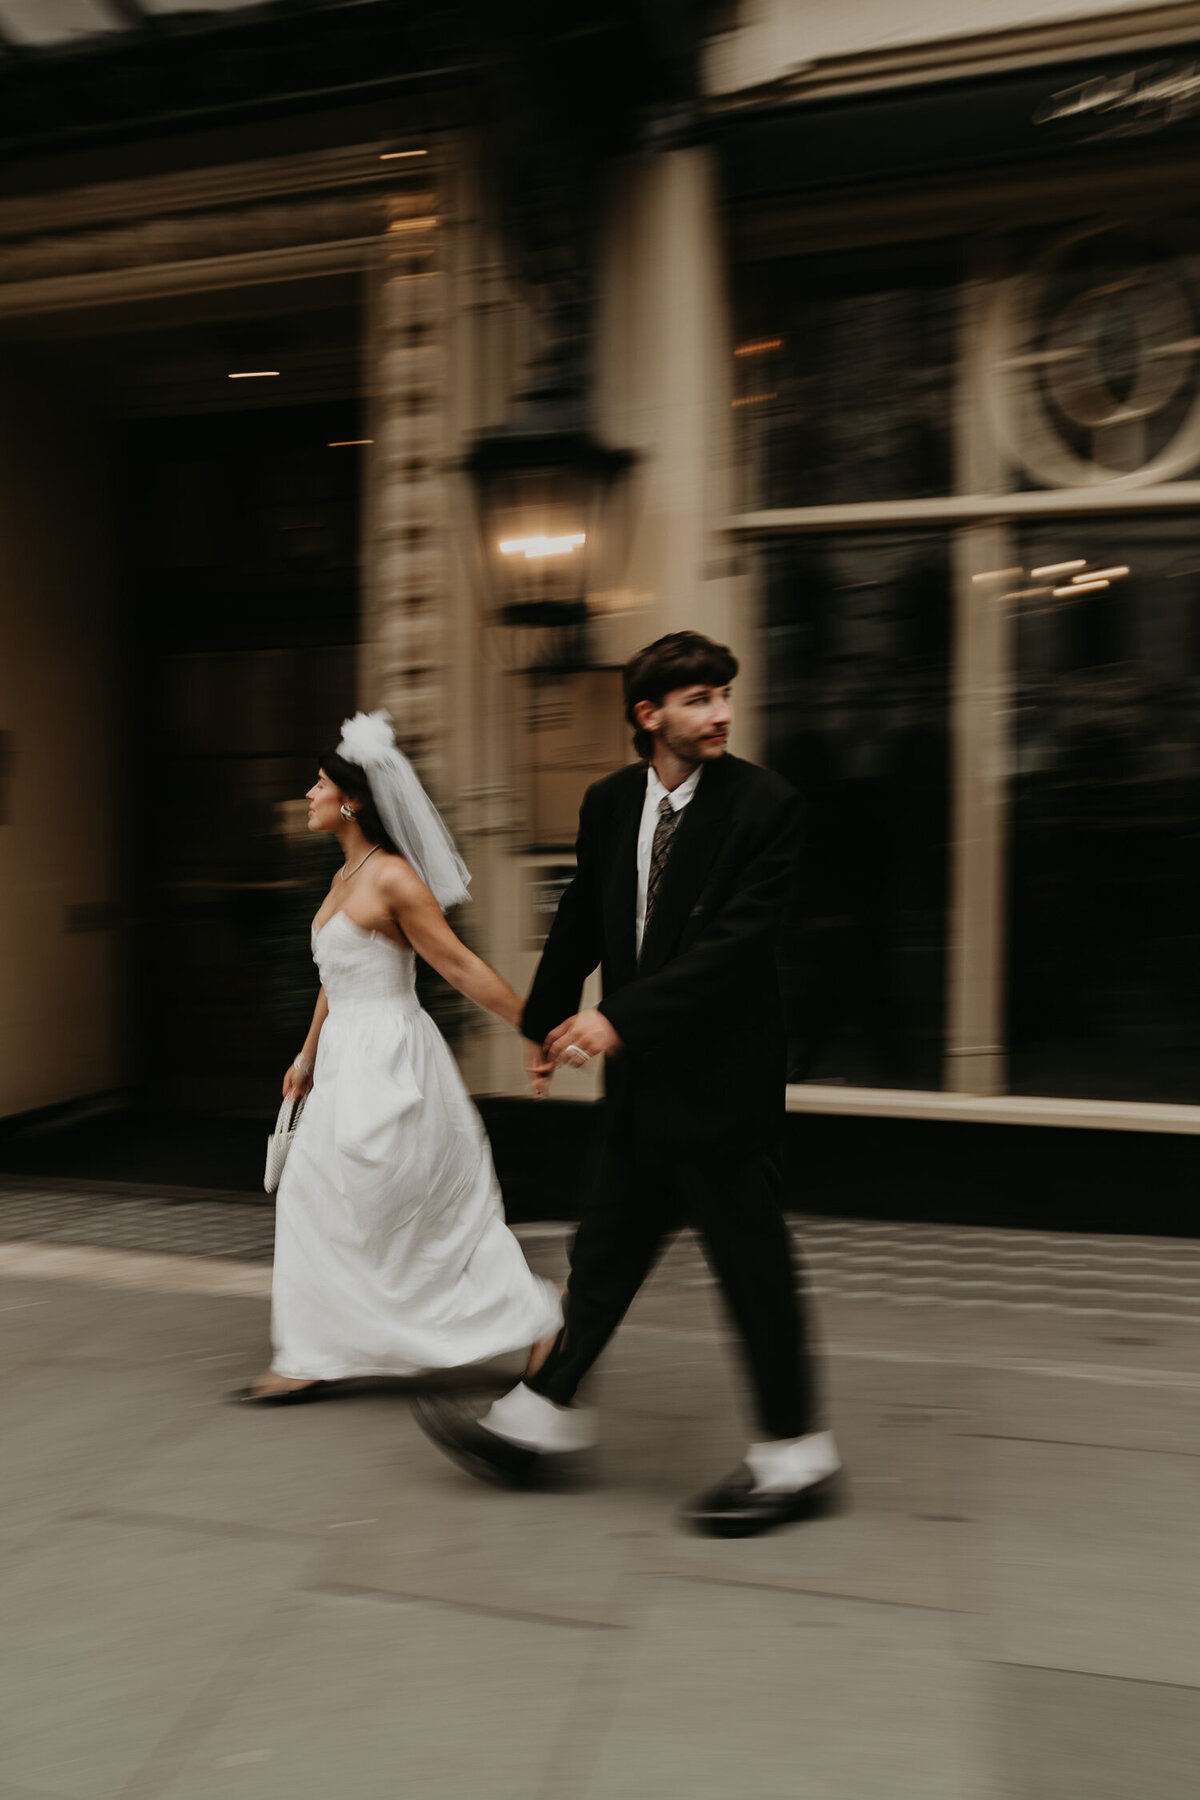 A wedding couple walk the streets of London.